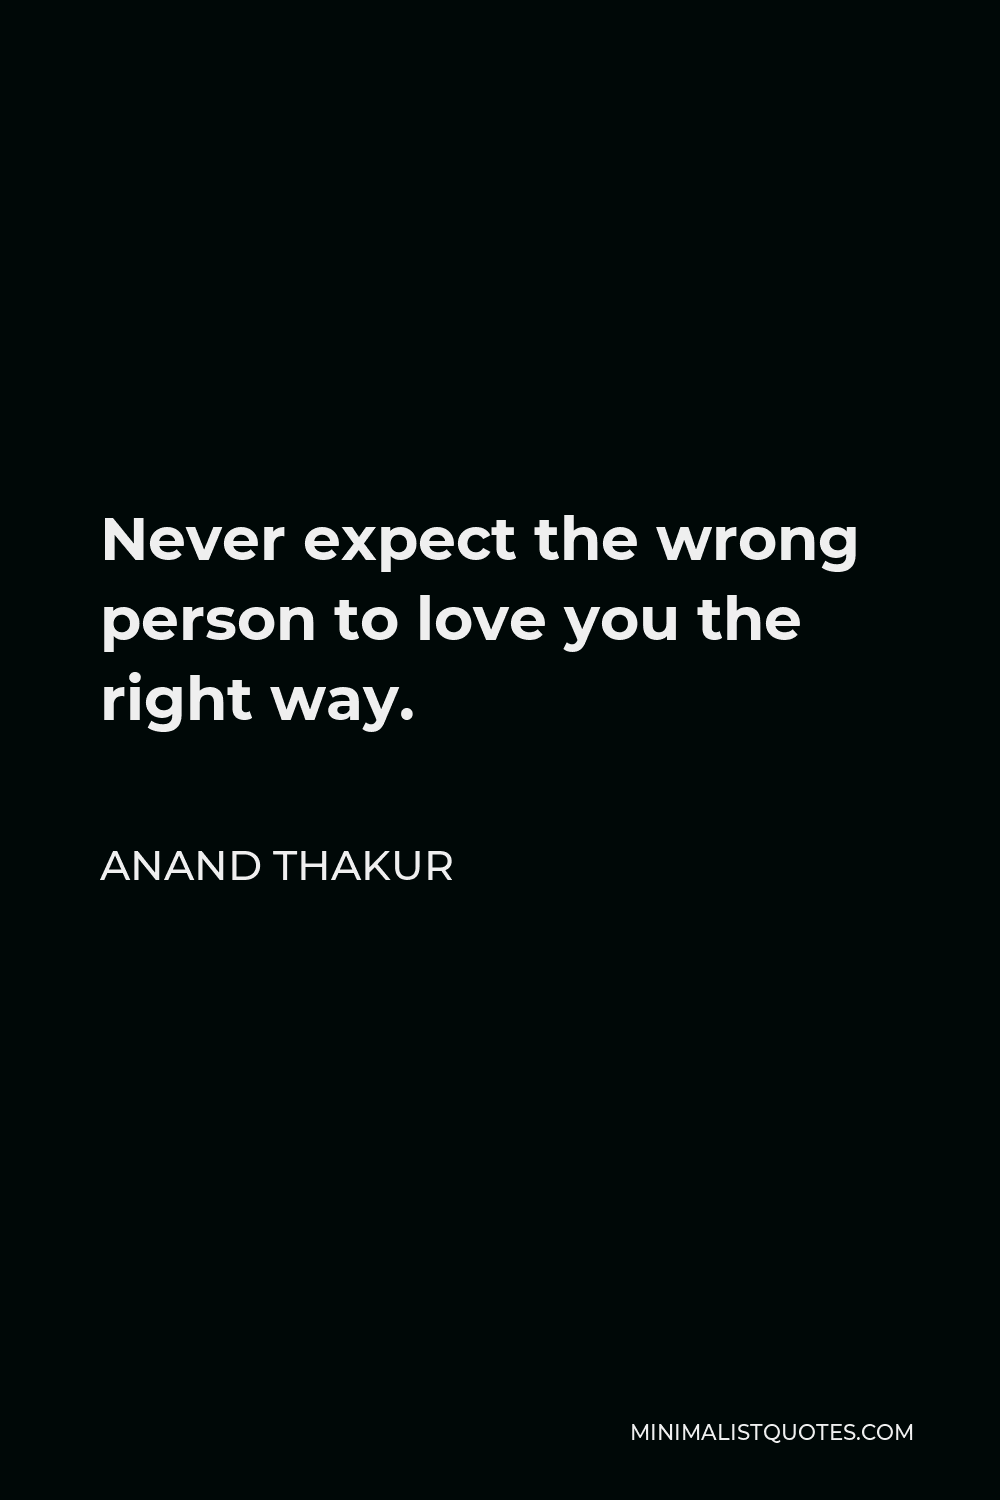 Anand Thakur Quote - Never expect the wrong person to love you the right way.